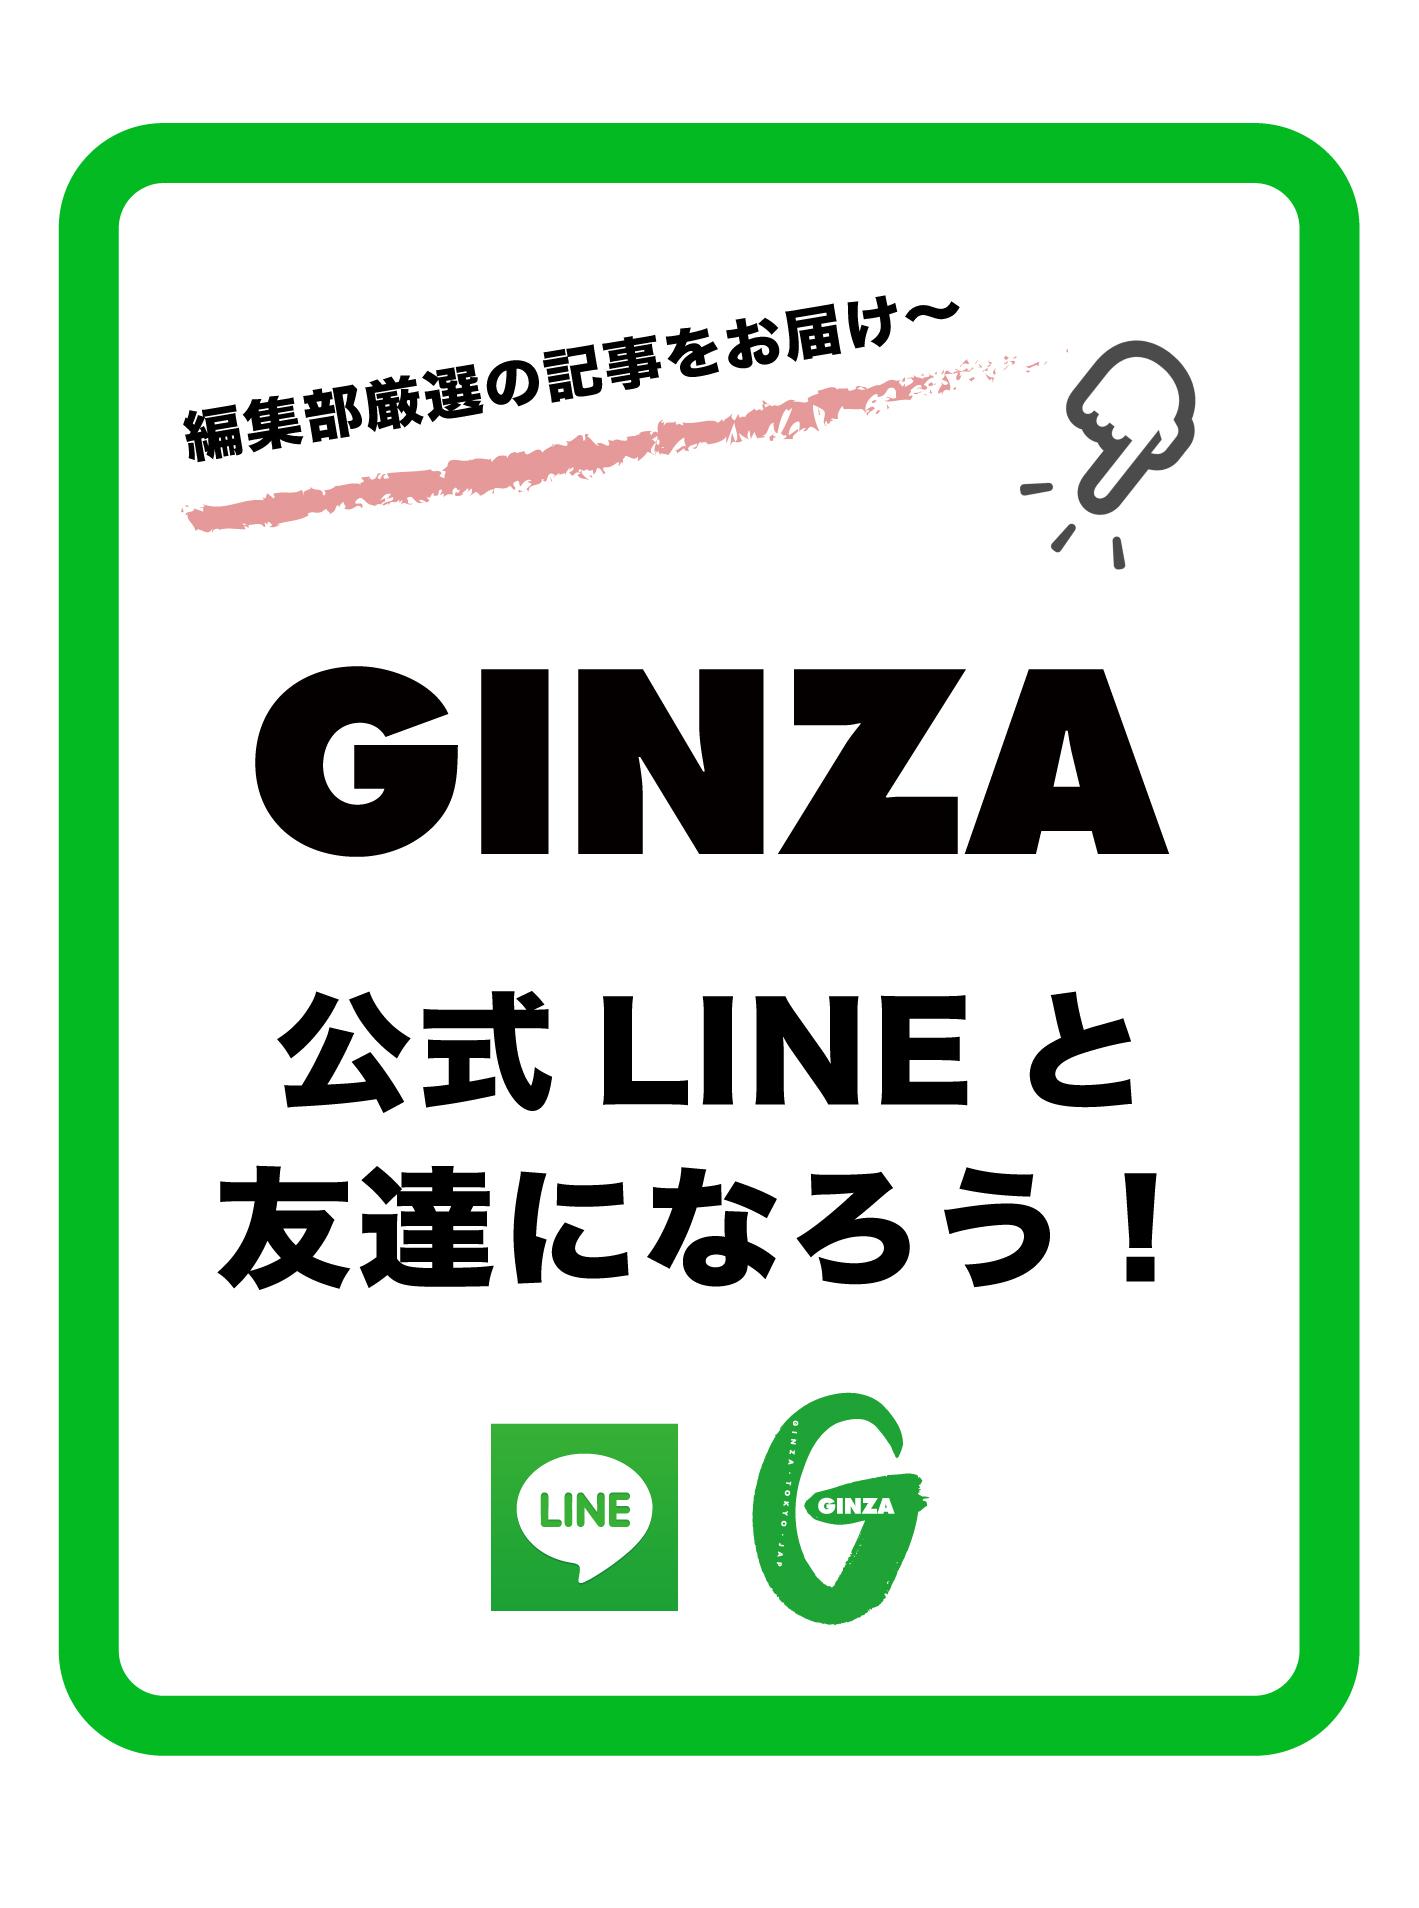 Let&amp;#8217;s be friends♪【LINE】GINZA公式アカウントと友達になろう！